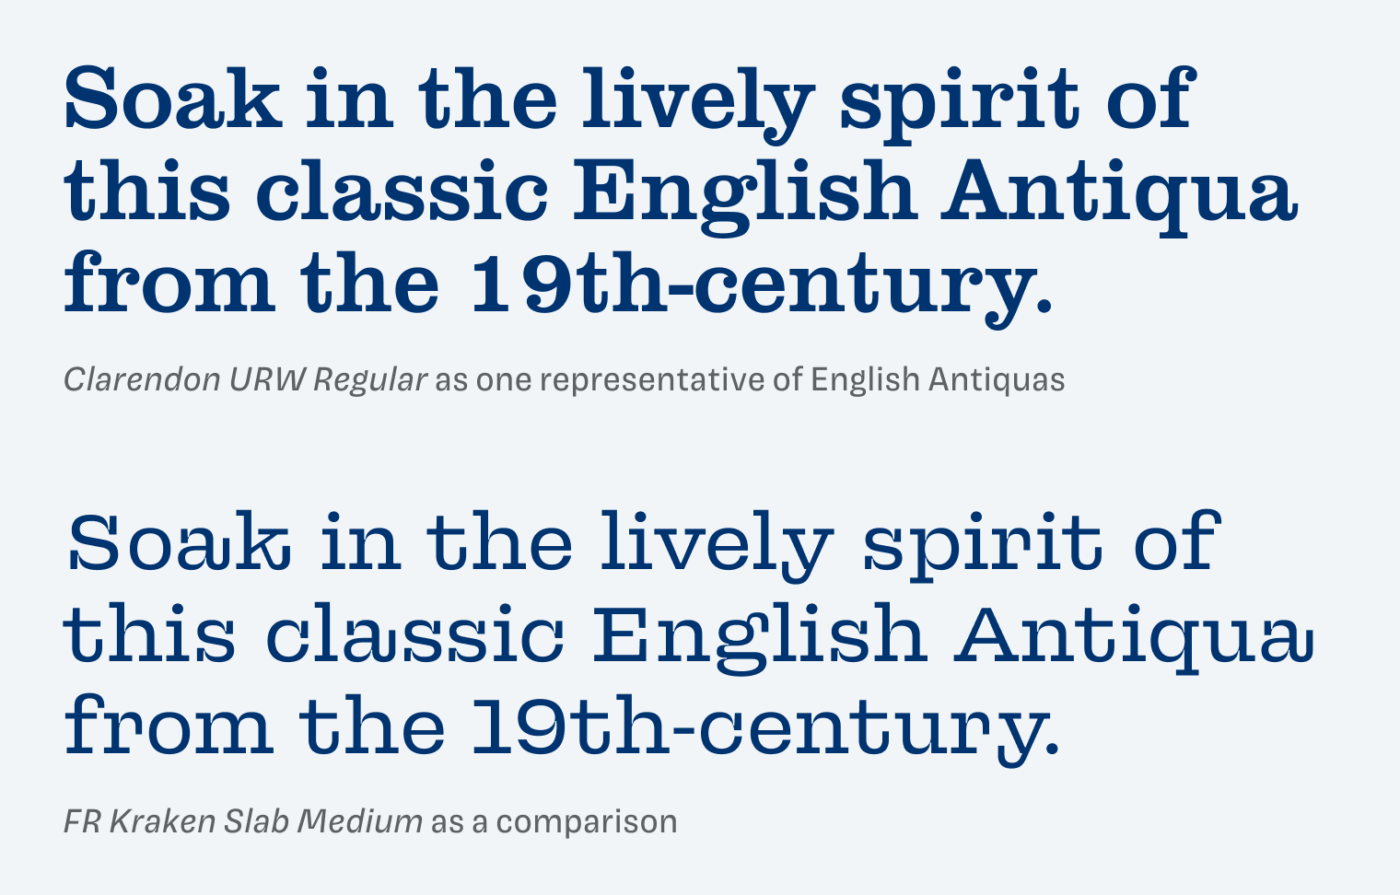 Soak in the lively spirit of this classic English Antiqua from the 19th-century. Clarendon URW Regular as one representative of English Antiquas with FR Kraken Slab Medium as a comparison